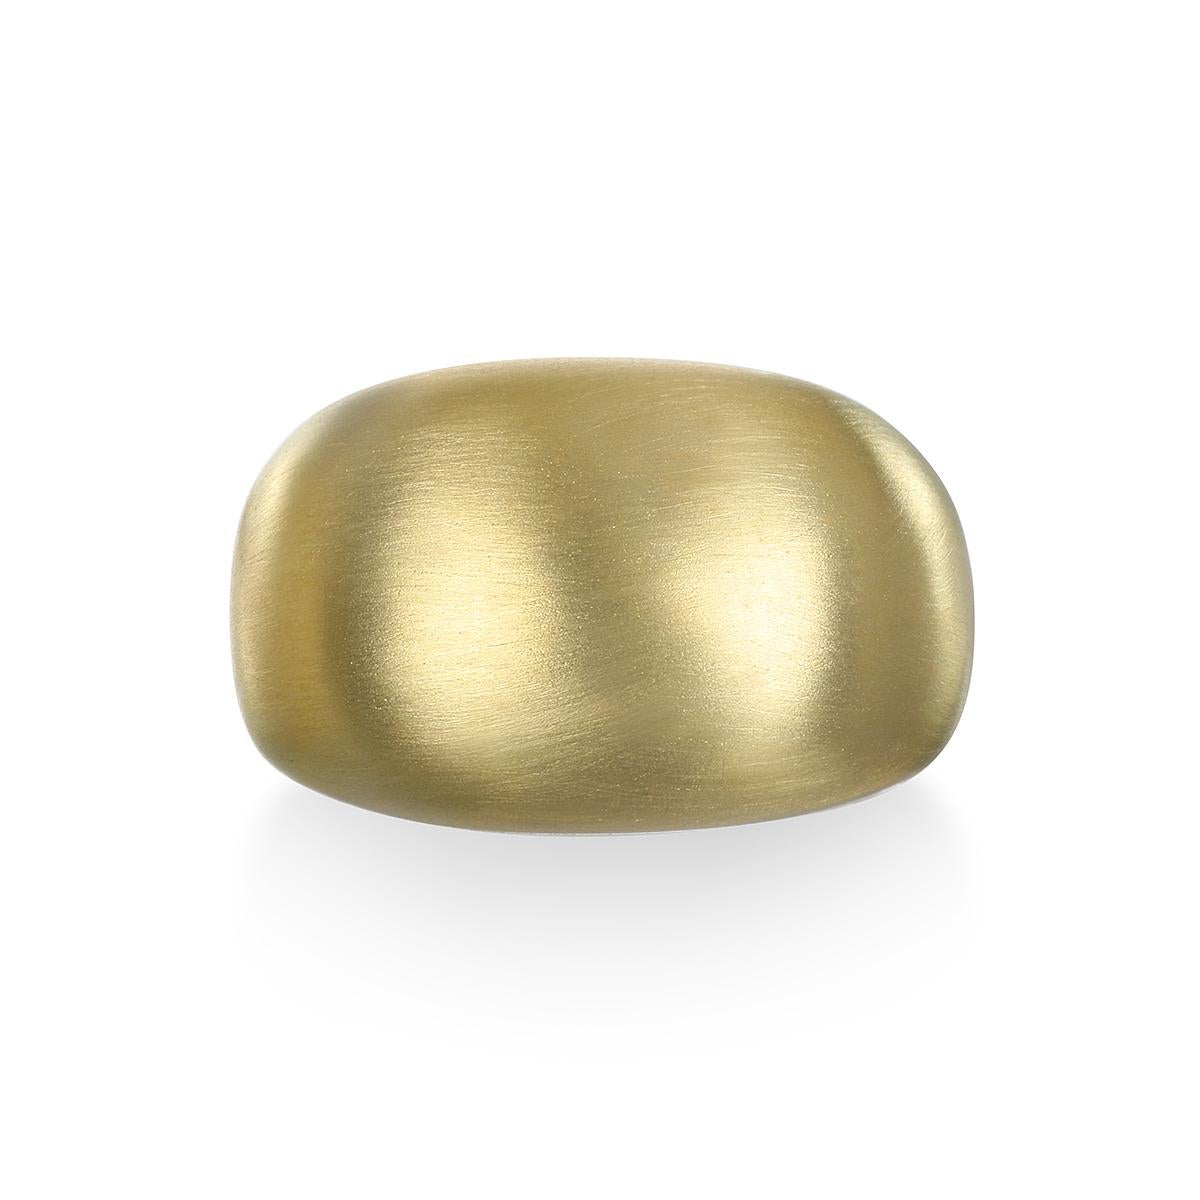 Faye Kim's 18 Karat Gold High Dome Ring, with its clean, understated design and smooth, polished finish, features an eye-catching 8.8mm-high dome. This special piece can be incorporated into virtually any wardrobe, from casual to formal, and is sure